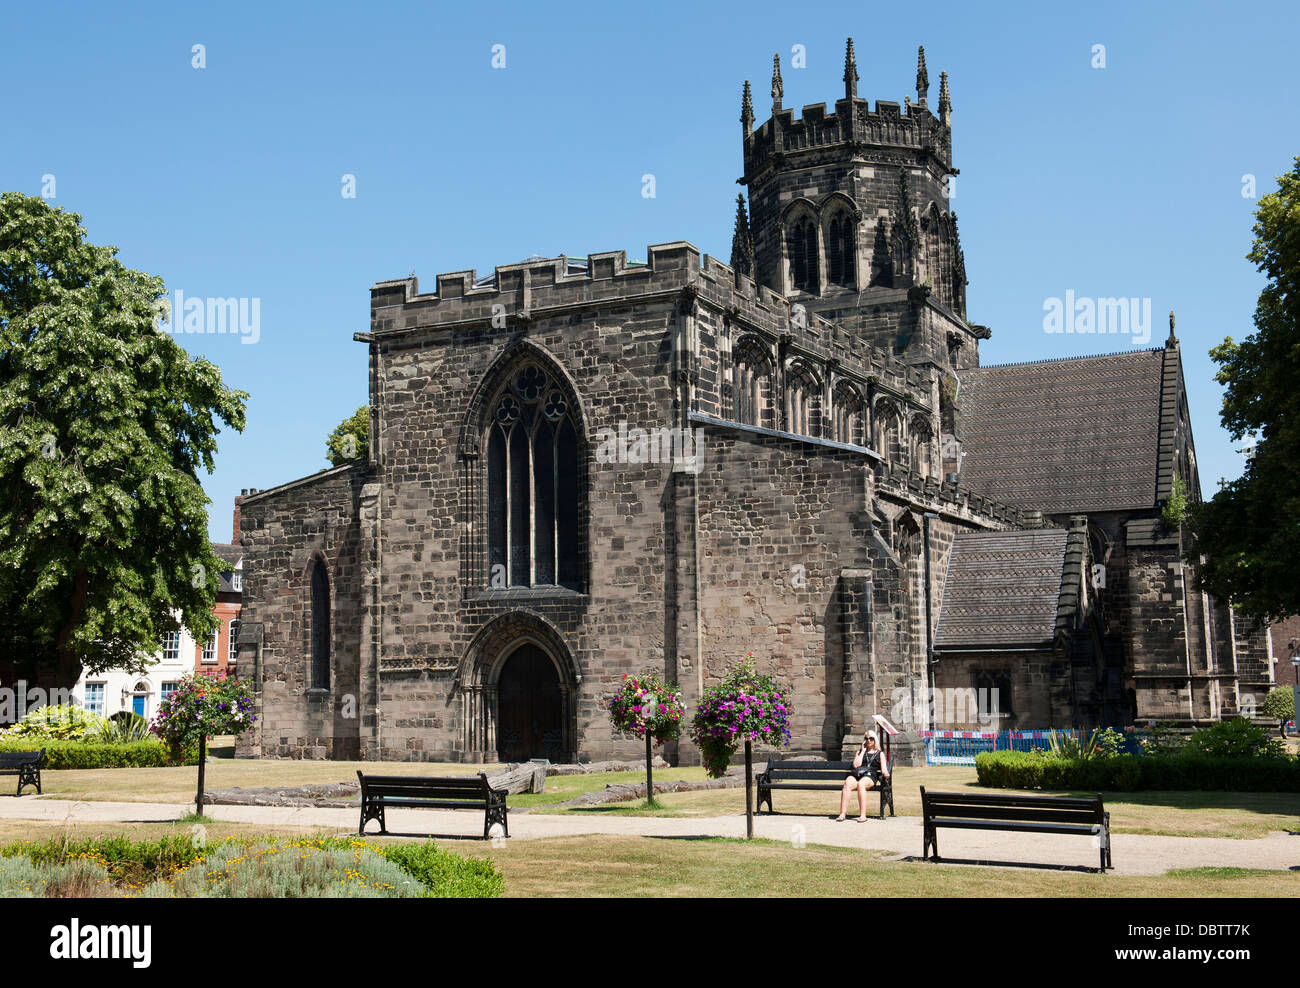 Eglise St Mary, Stafford, Staffordshire, Angleterre, Royaume-Uni. Banque D'Images